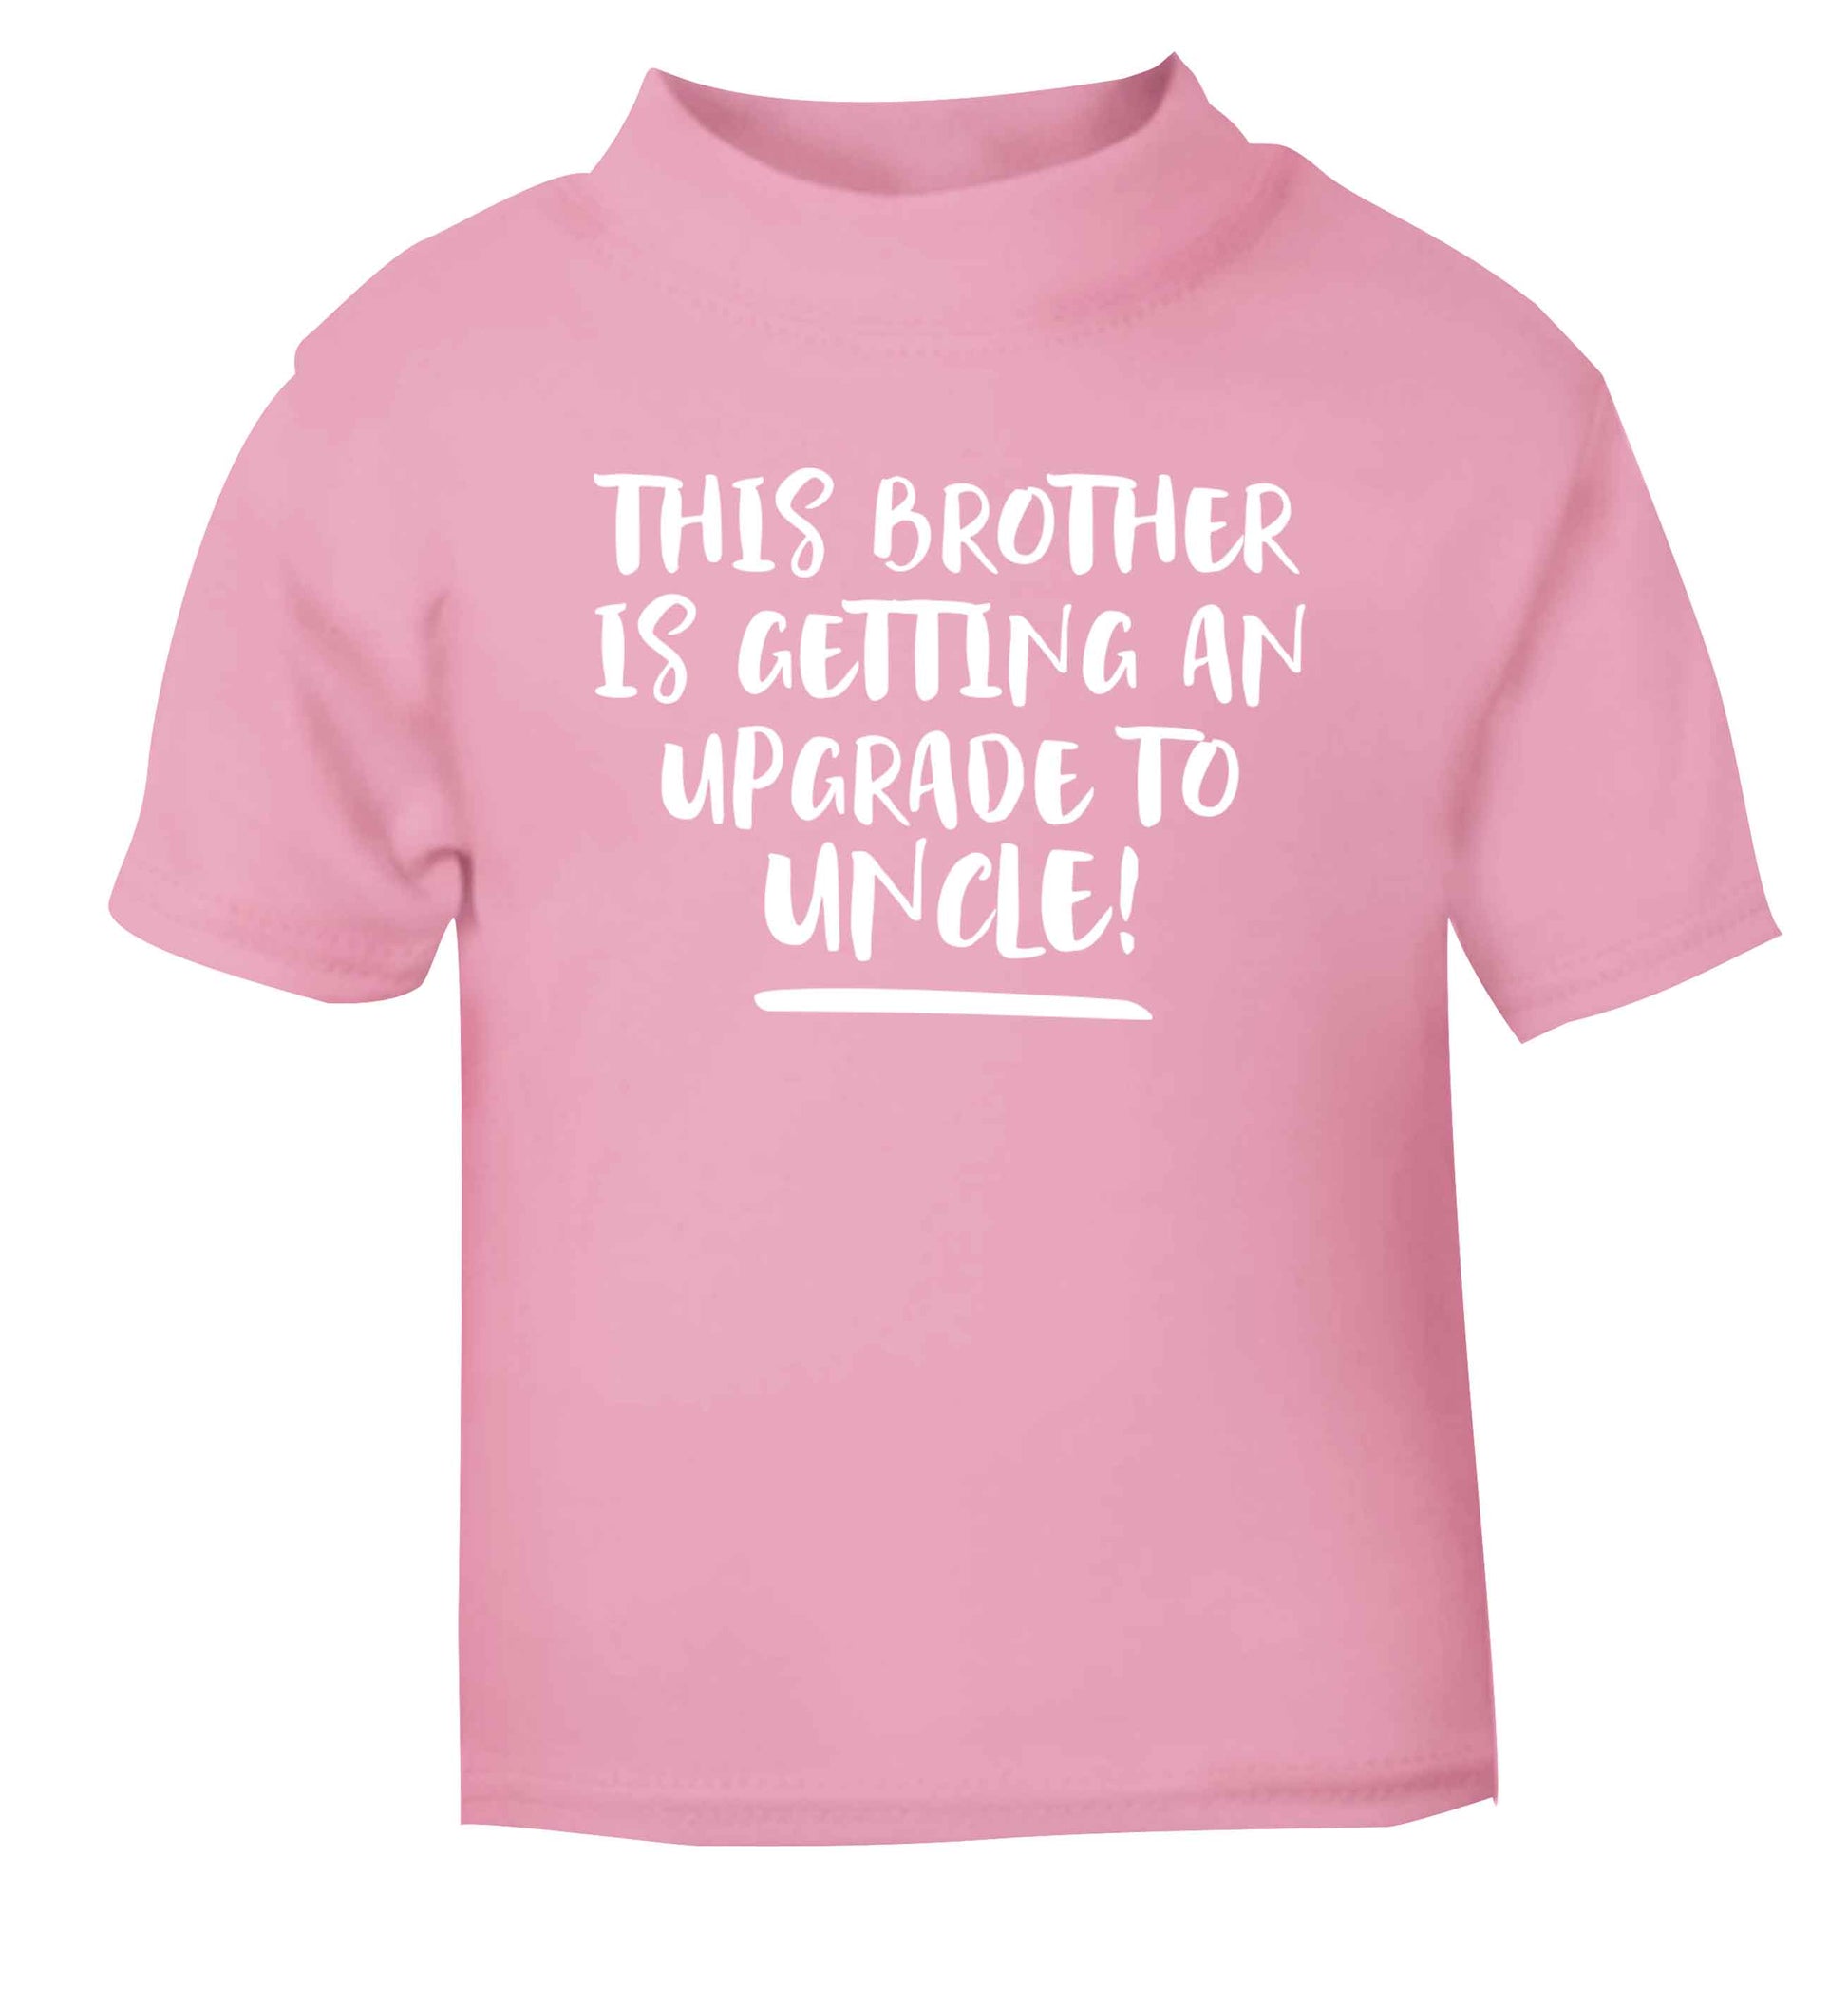 This brother is getting an upgrade to uncle! light pink Baby Toddler Tshirt 2 Years